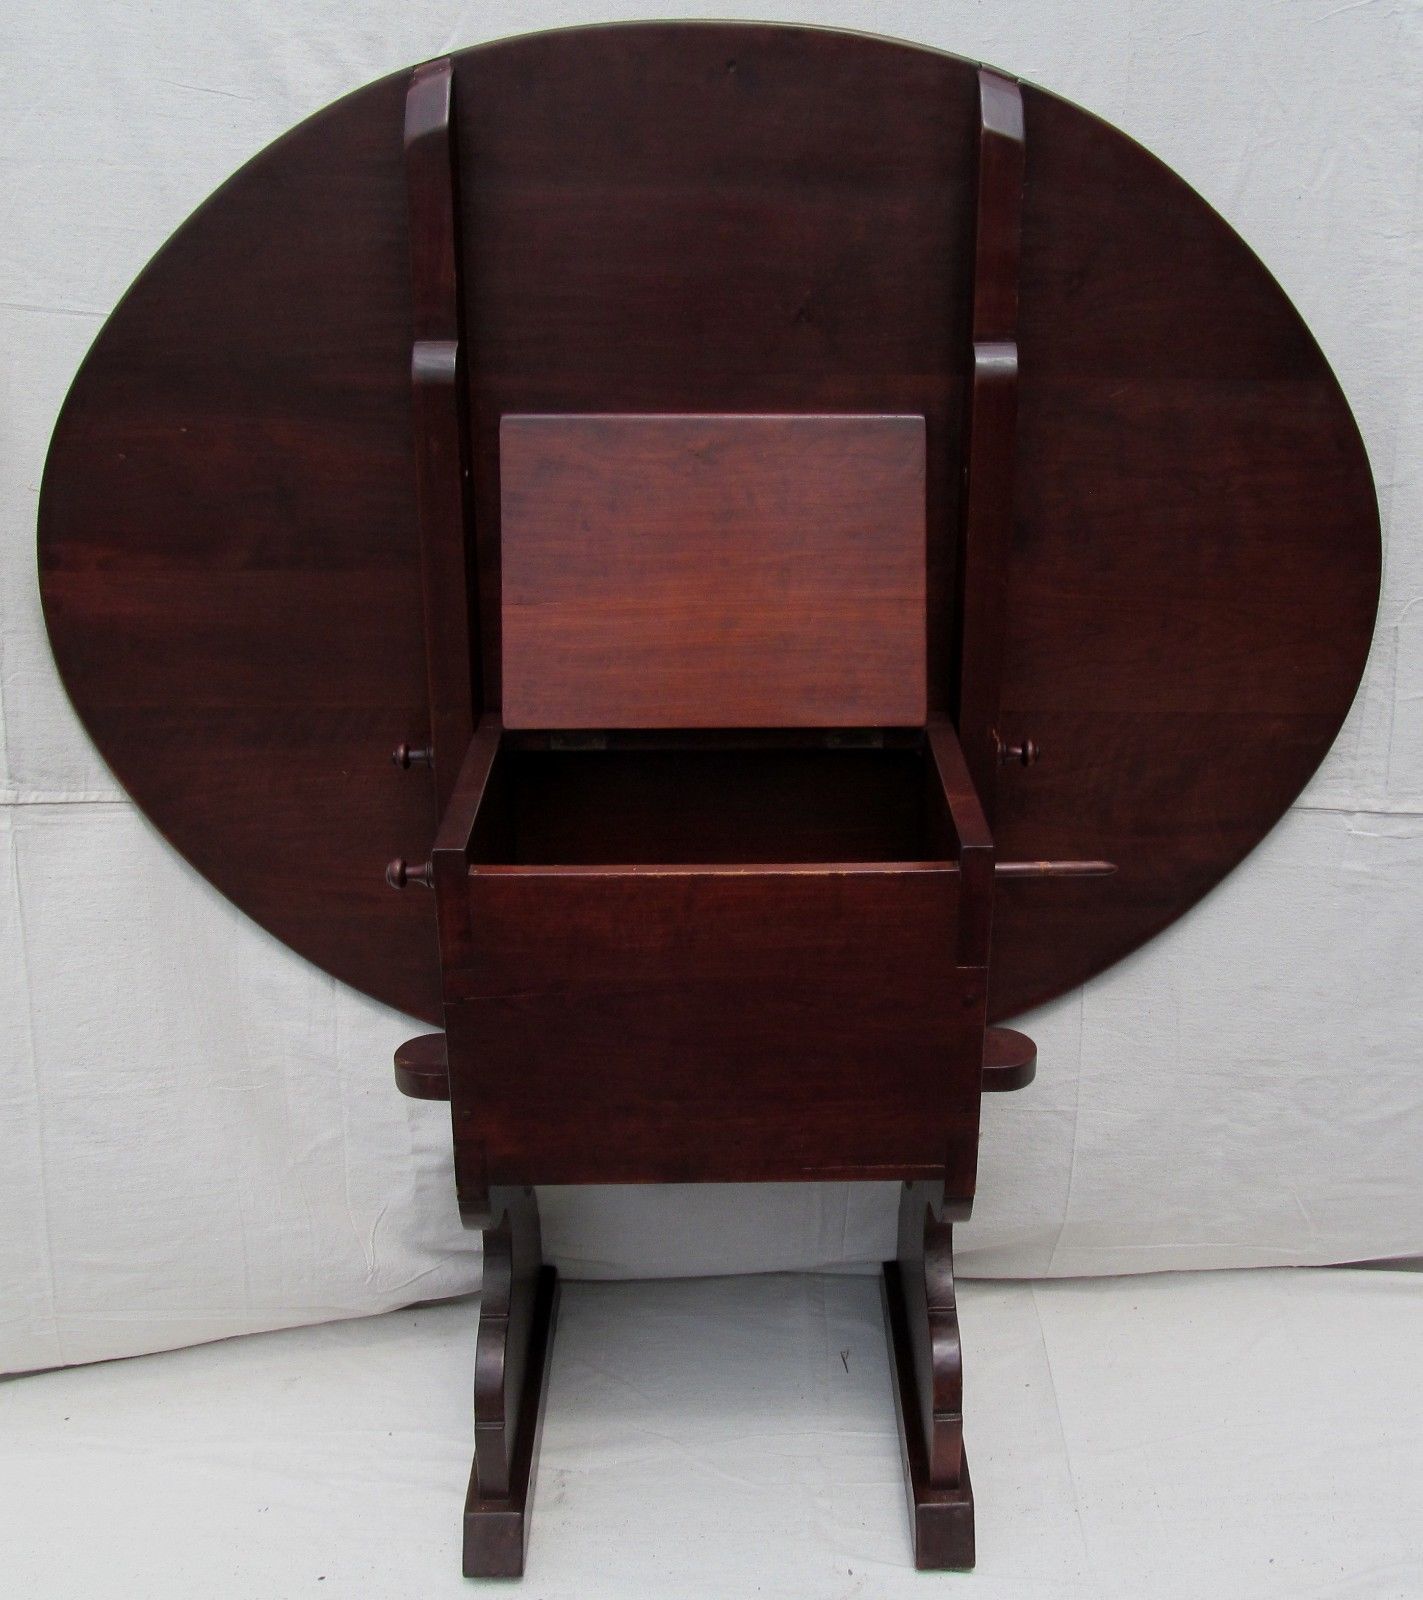 ANTIQUE QUEEN ANNE STYLE OVAL FORM CHERRY SHOE FOOT HUTCH TABLE - WONDERFUL